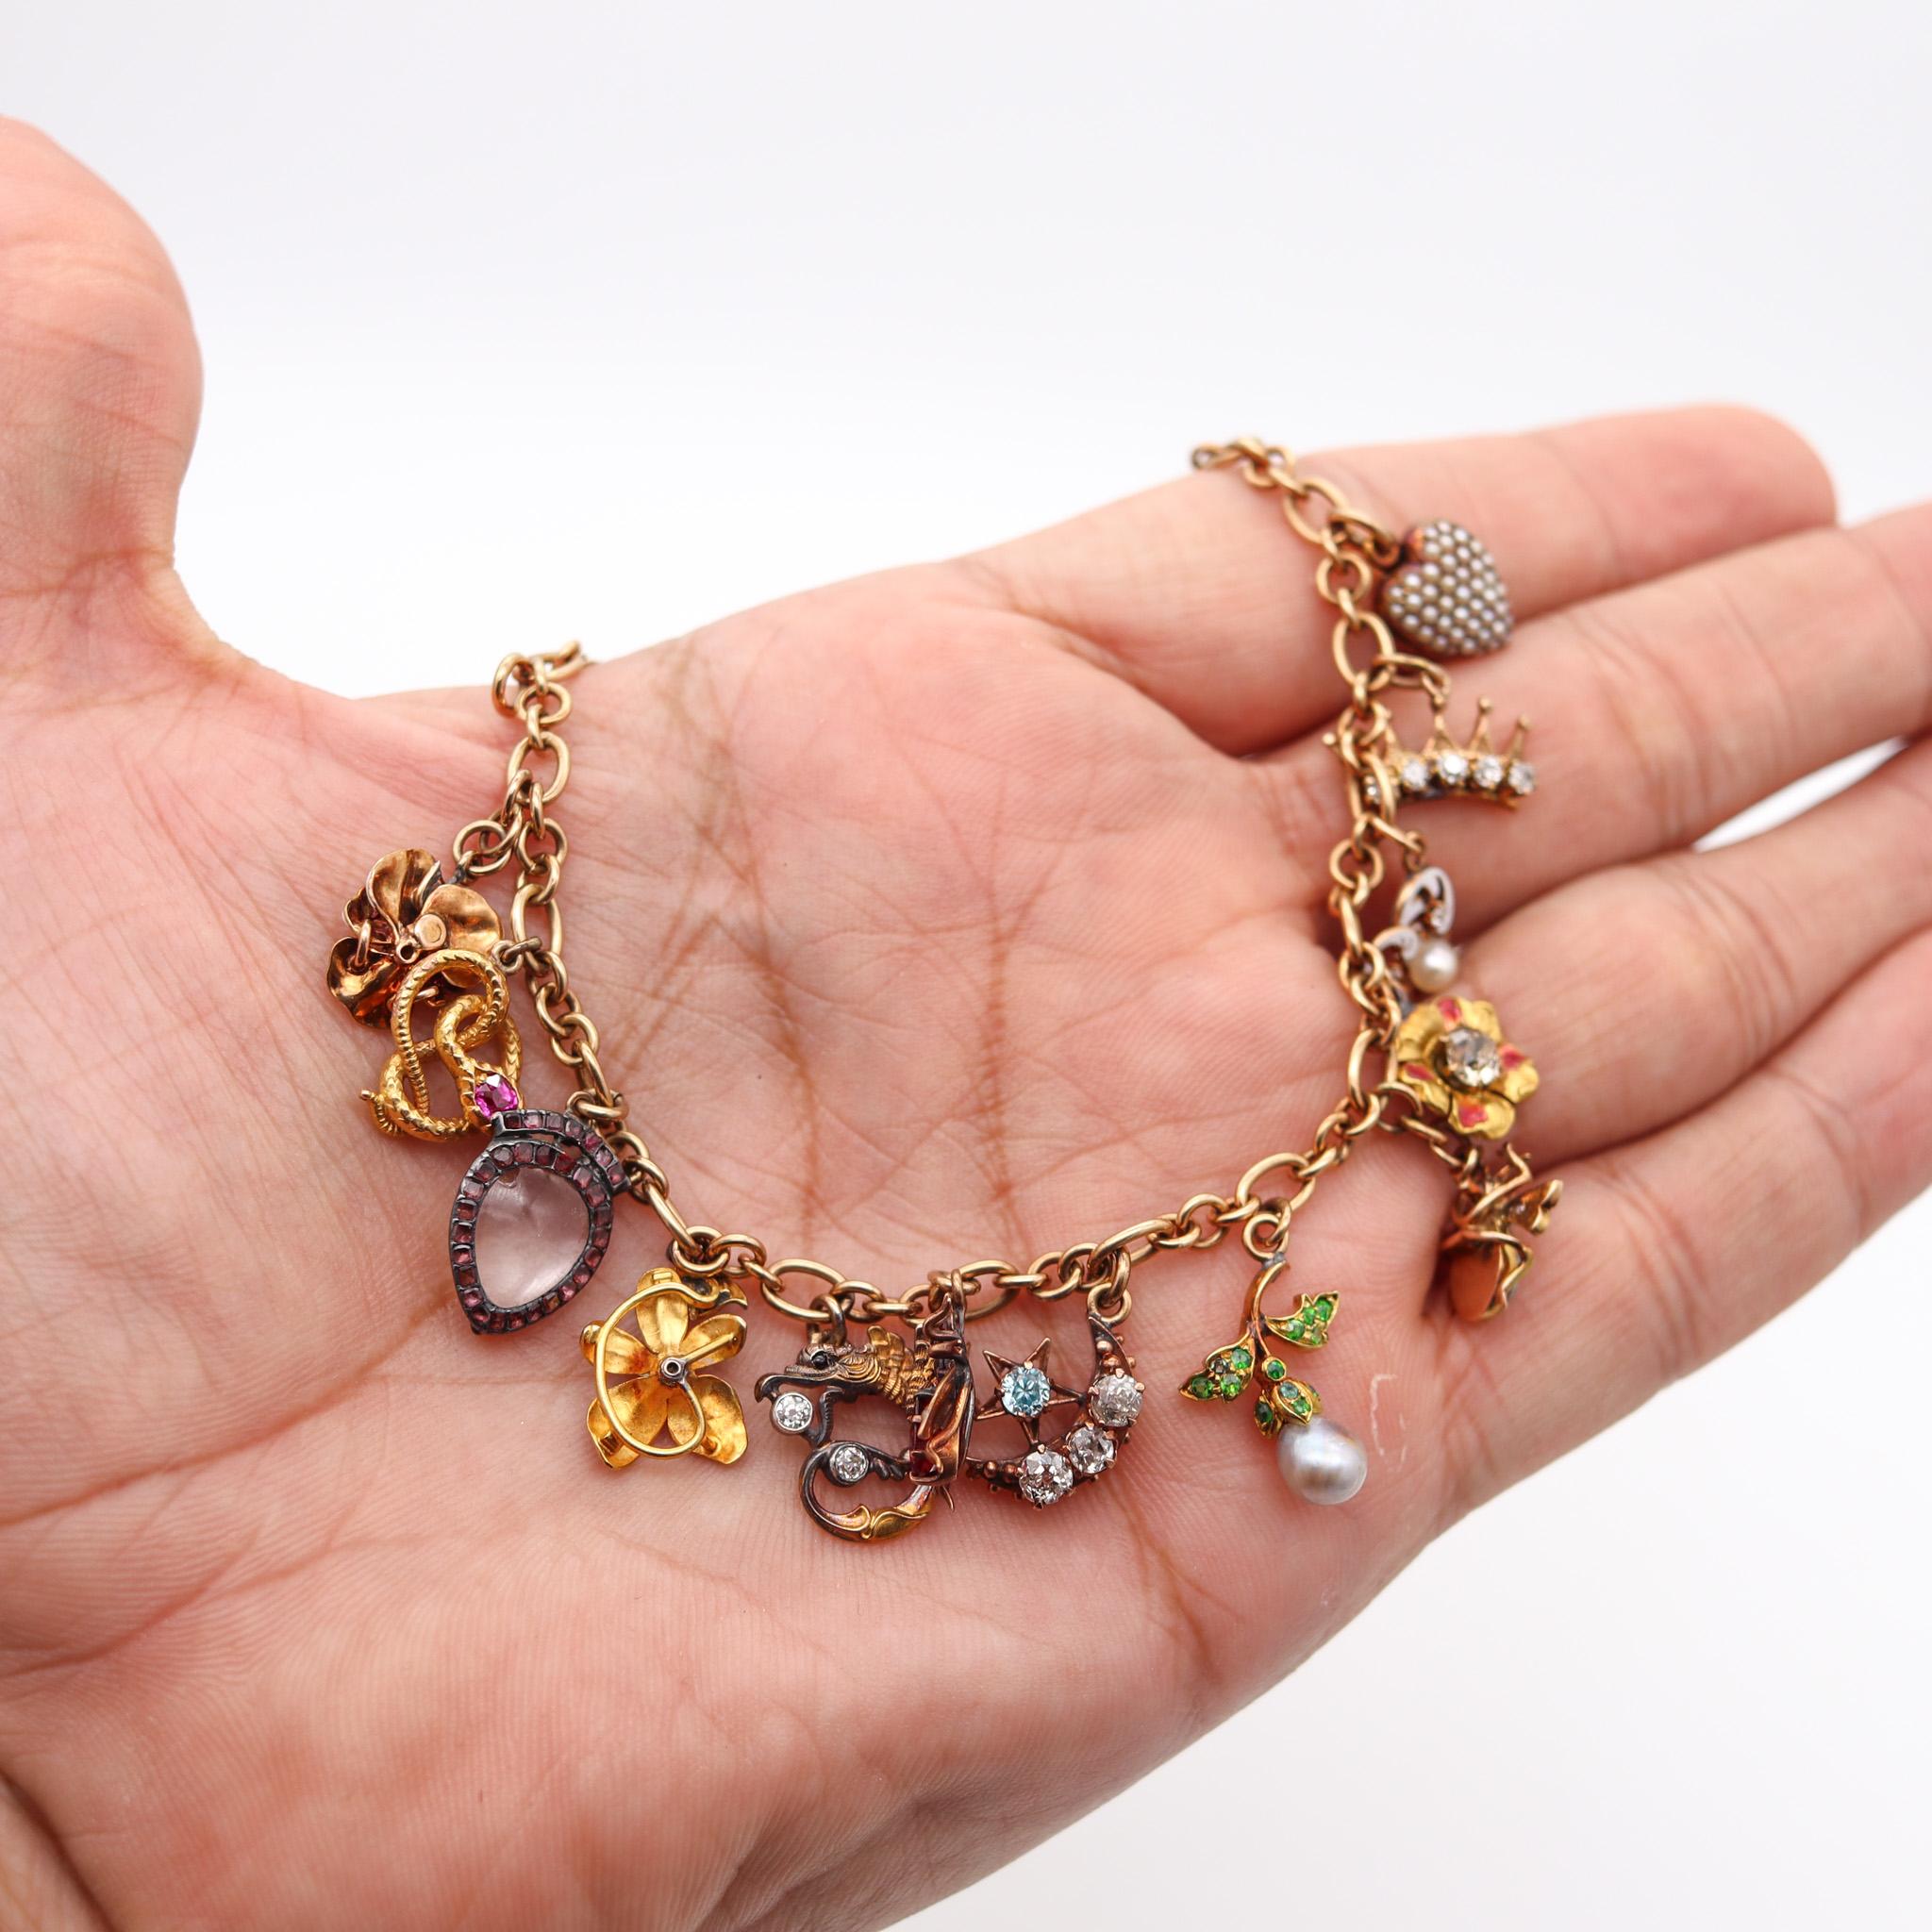 Art Nouveau 1910 Charms Bracelet In 14Kt Gold With Multi Gemstones And Enamels For Sale 3